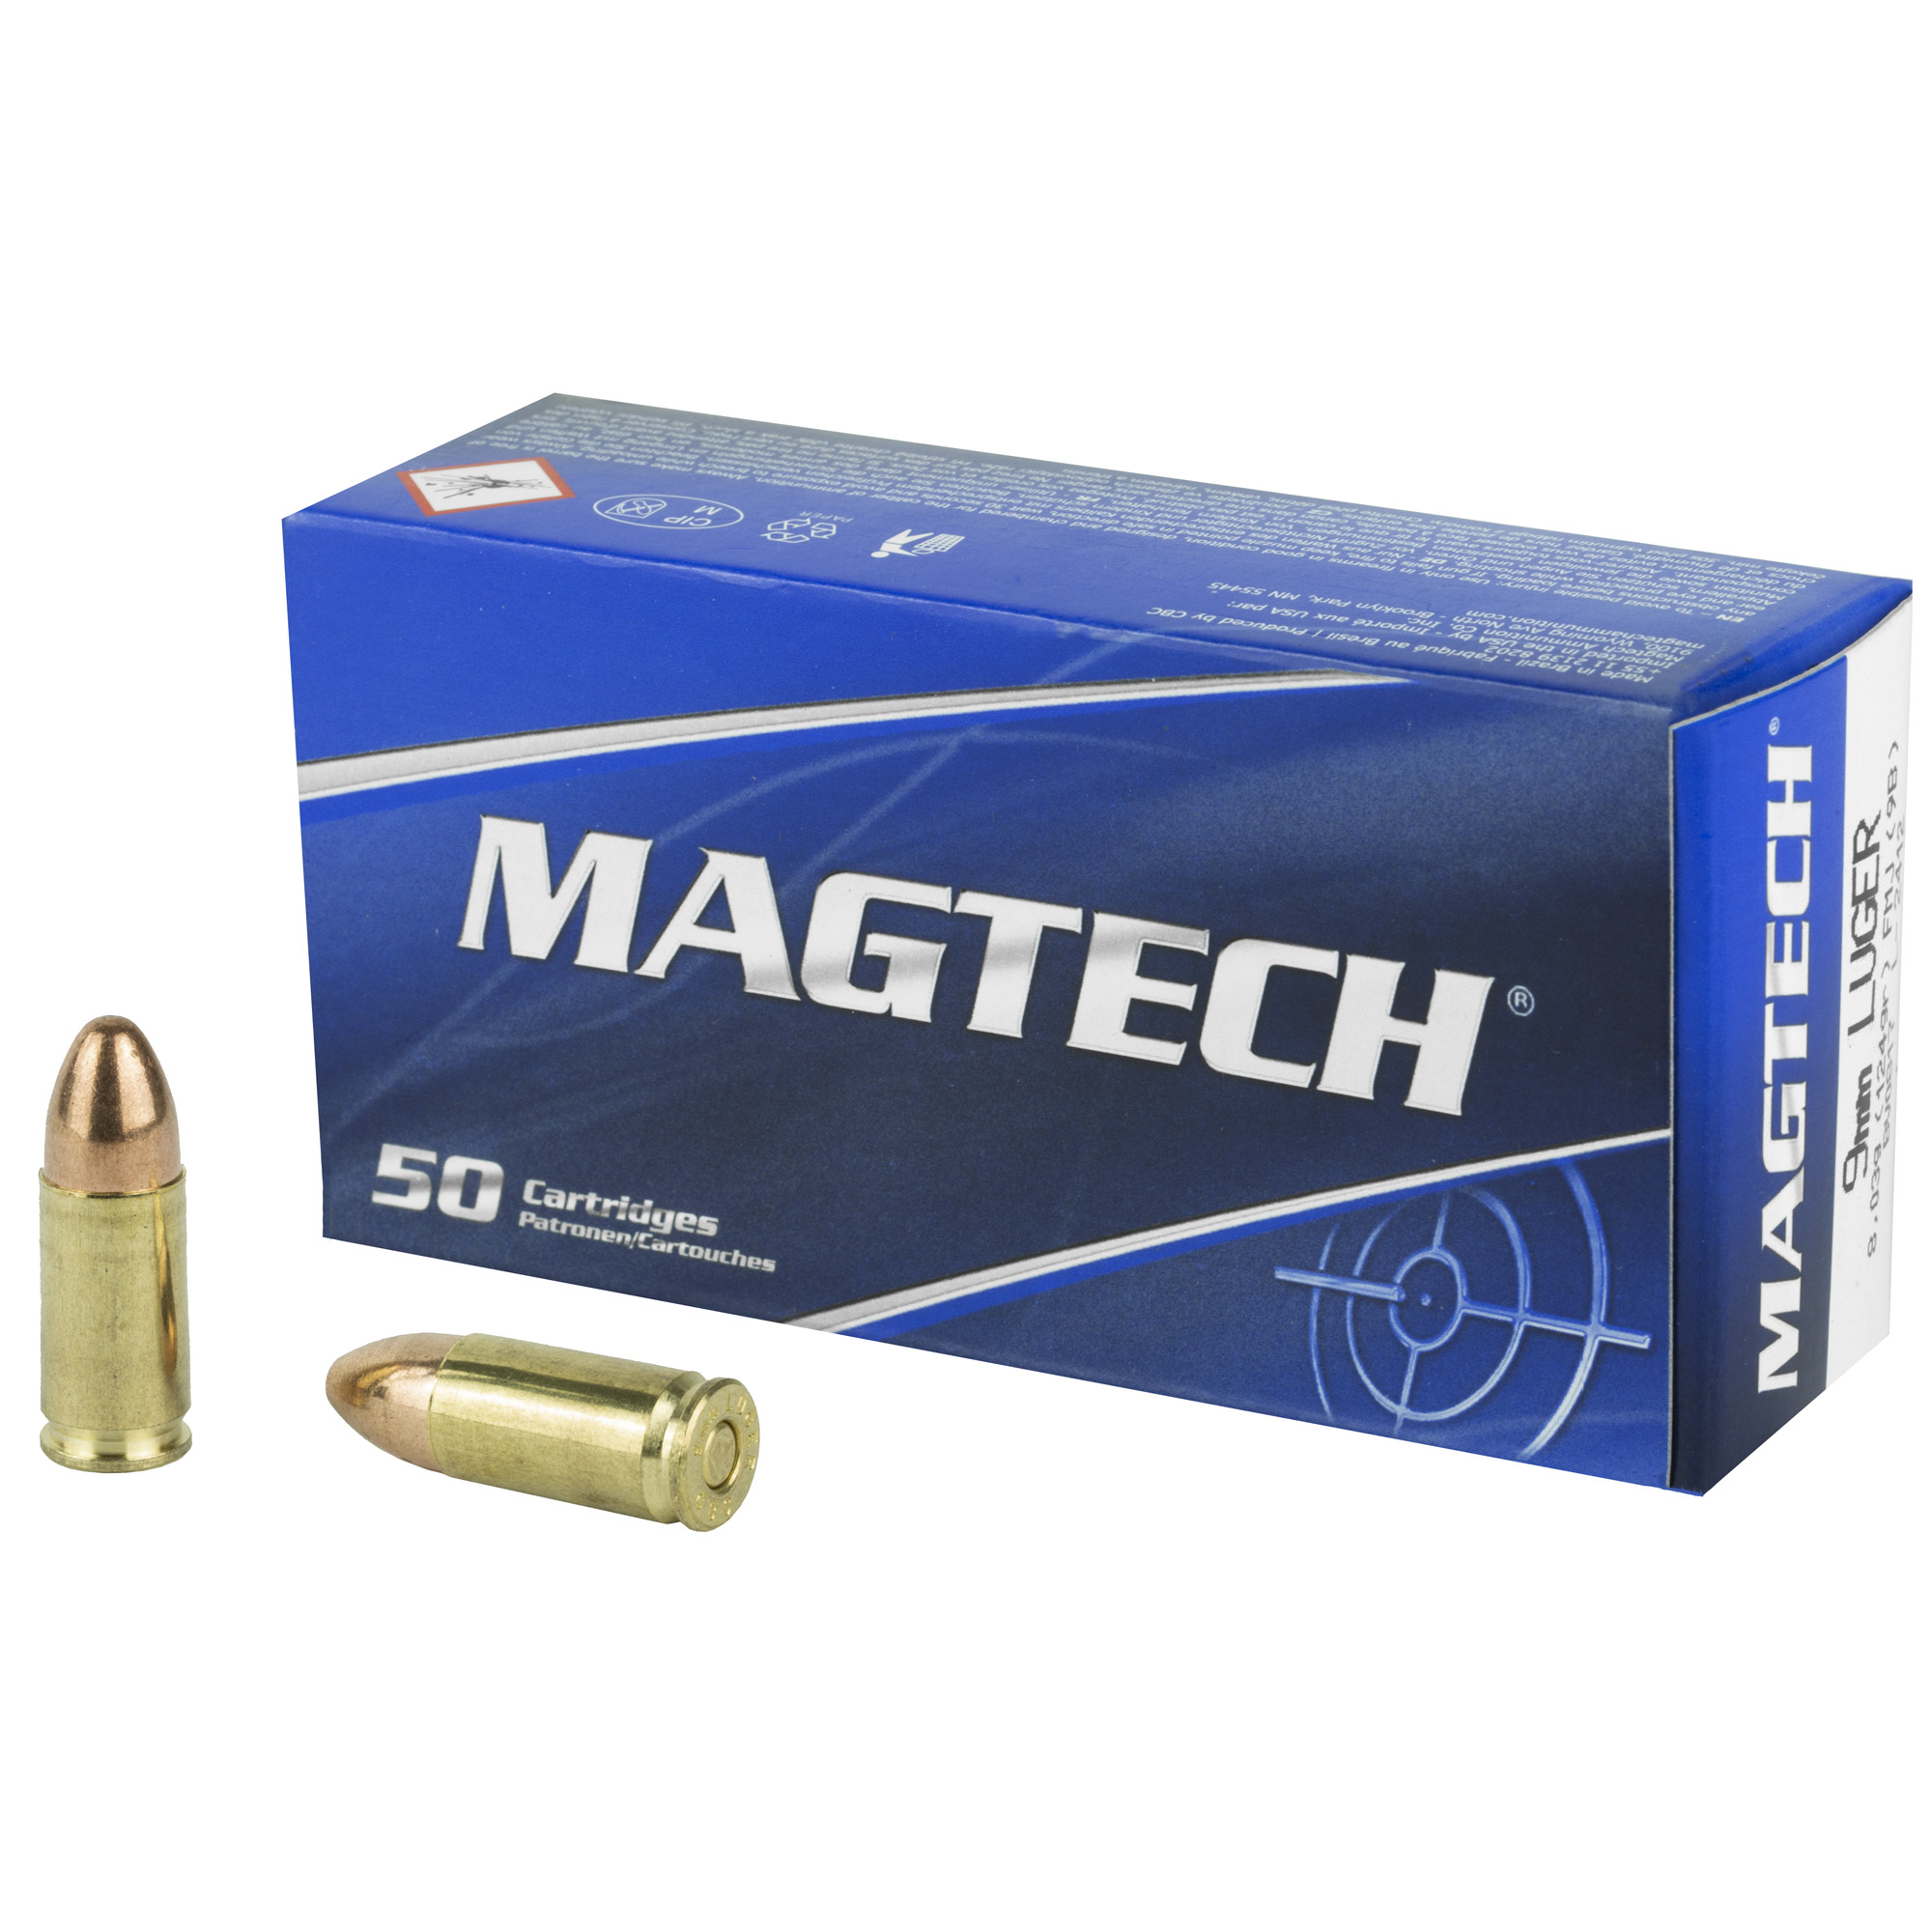 Magtech, Sport Shooting, 9MM, 124 Grain FMJ, Round Nose, Full Metal Case, 50 Round Box,  Case Pack 20-Boxes (1000Rds.), 9B,